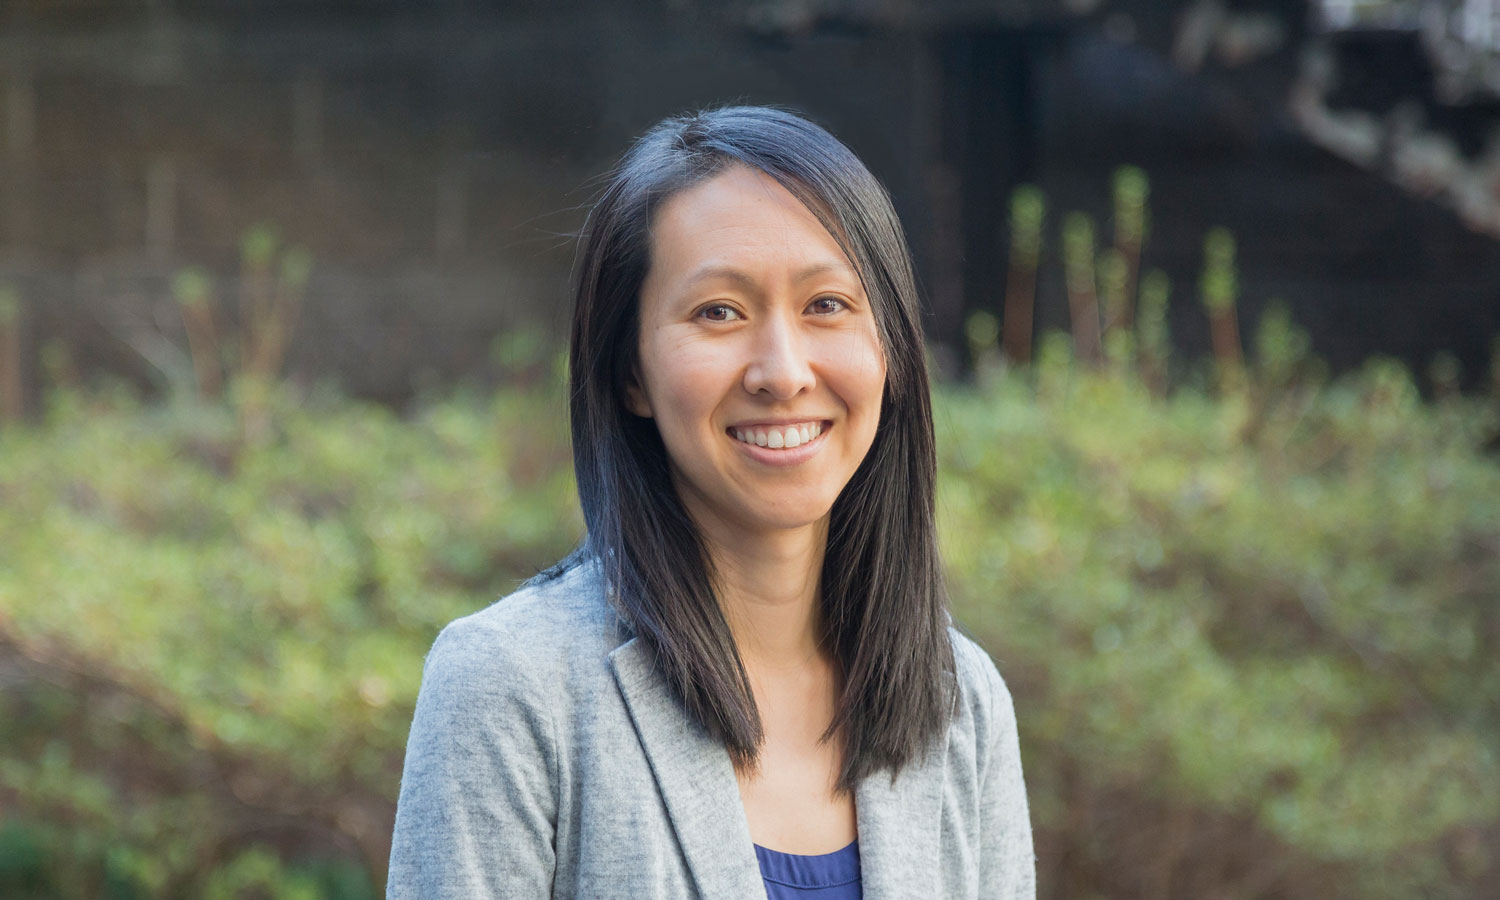 Priscilla Hwang, Ph.D., assistant professor in the Department of Biomedical Engineering at VCU College of Engineering